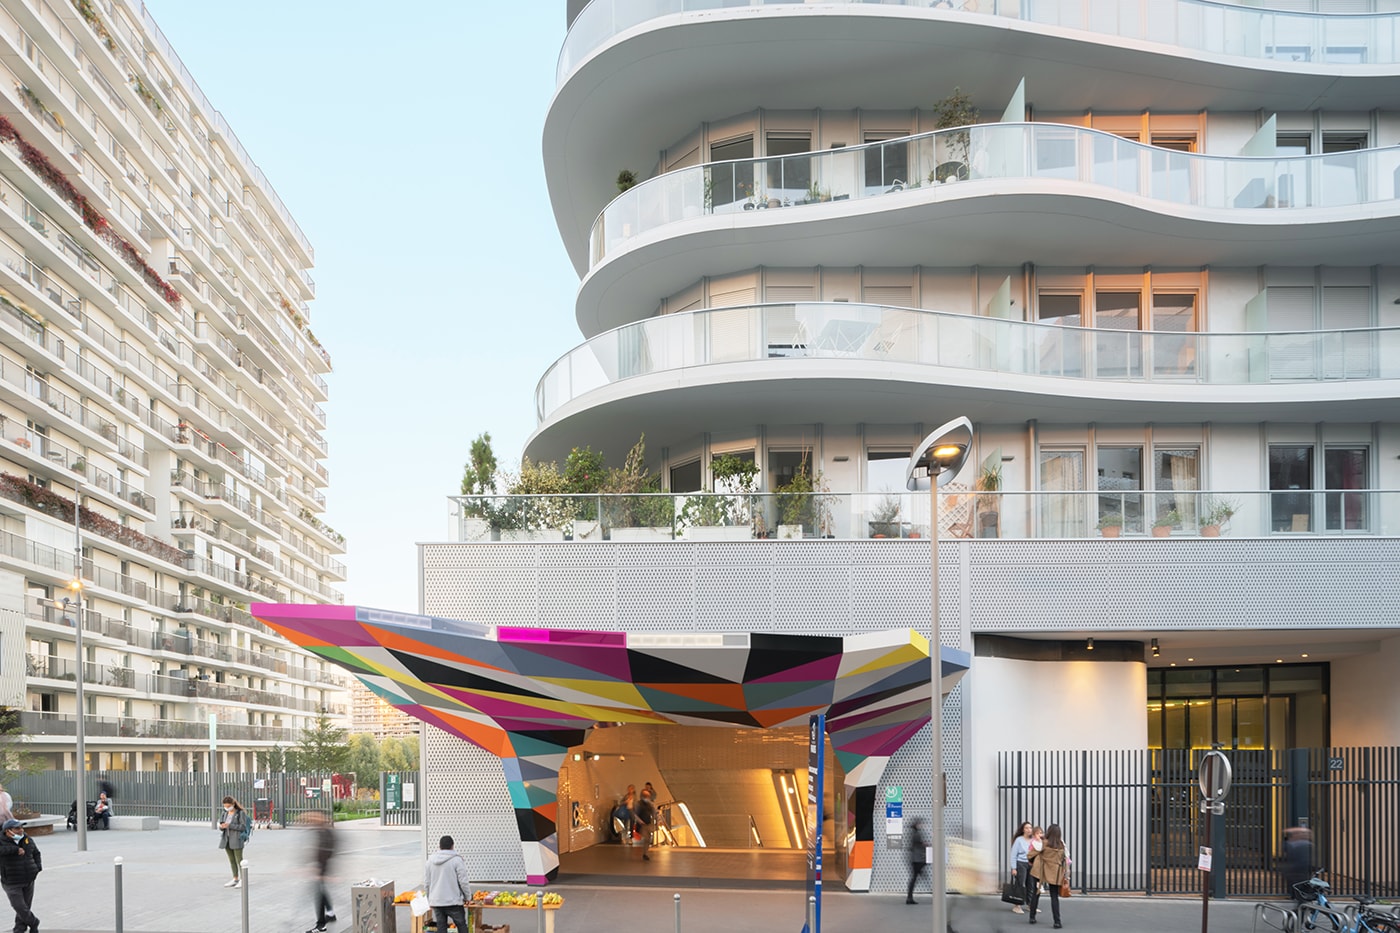 MAD's Sinuous Housing Block Brings a New Landmark to Paris